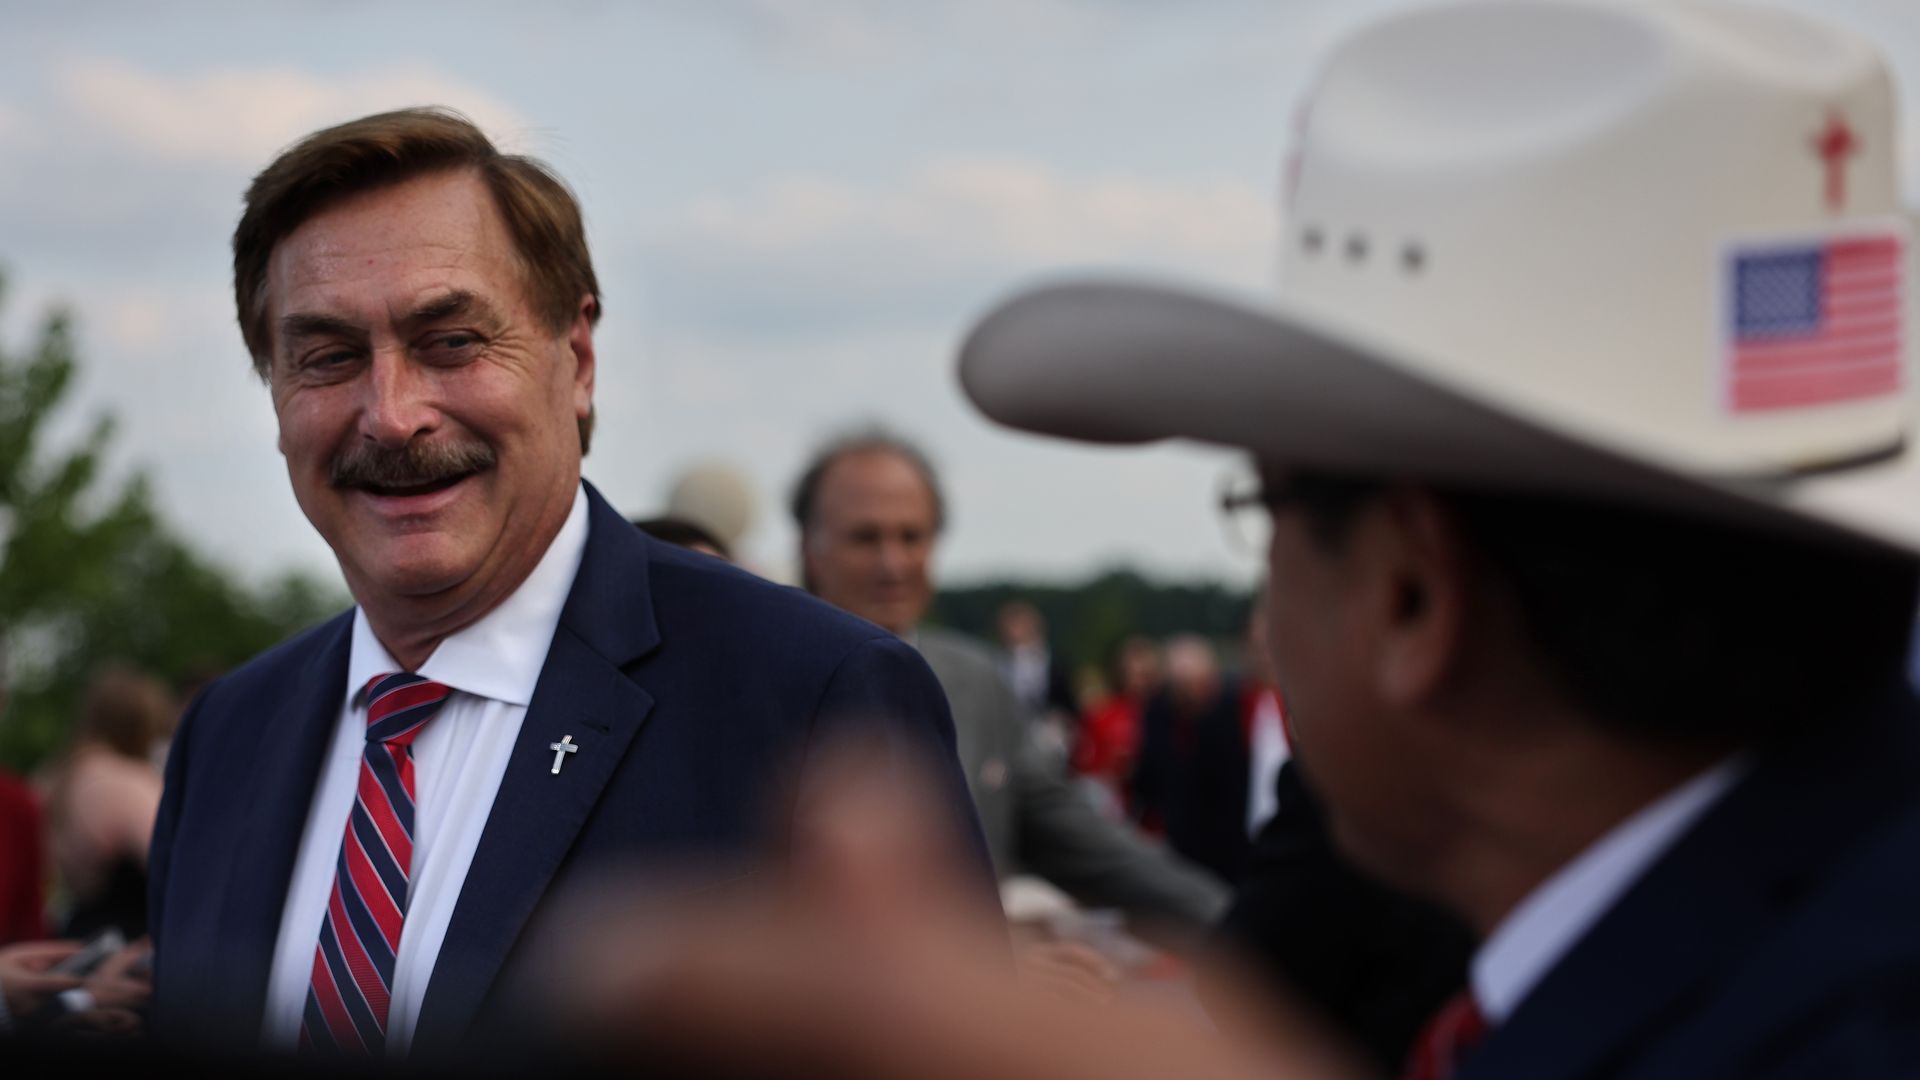 Mike Lindell wearing a blue suit and red/blue tie smiles at a man in a cowboy hat with an American flag and a cross on the back. Lindell's suit has a cross pin on it. 